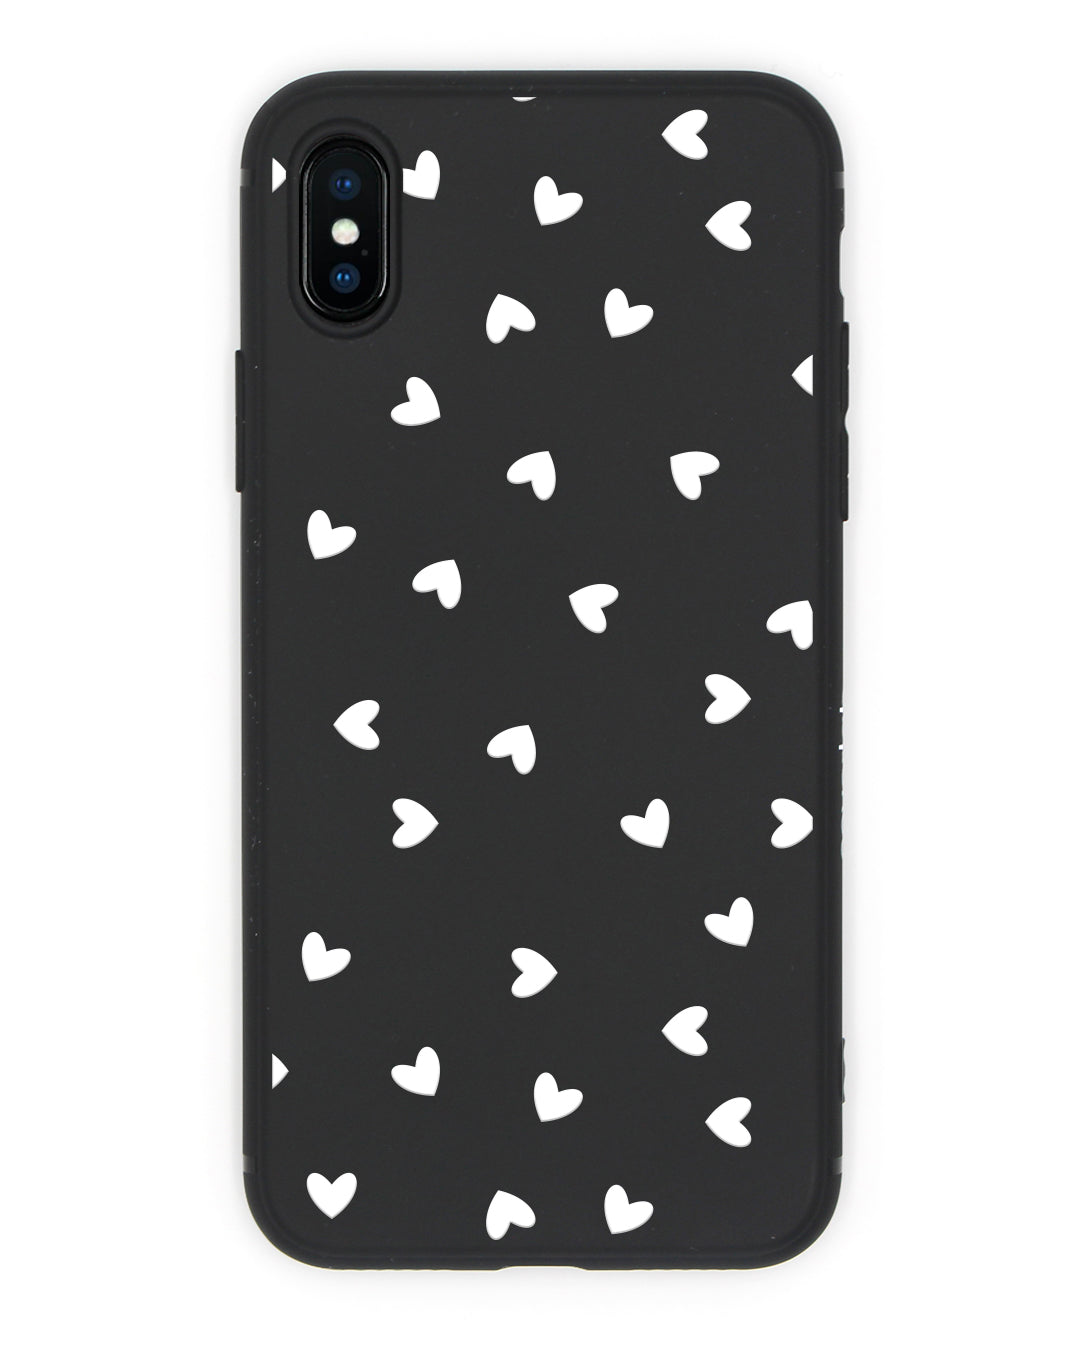 Black Hearts iPhone Case - Coverlab